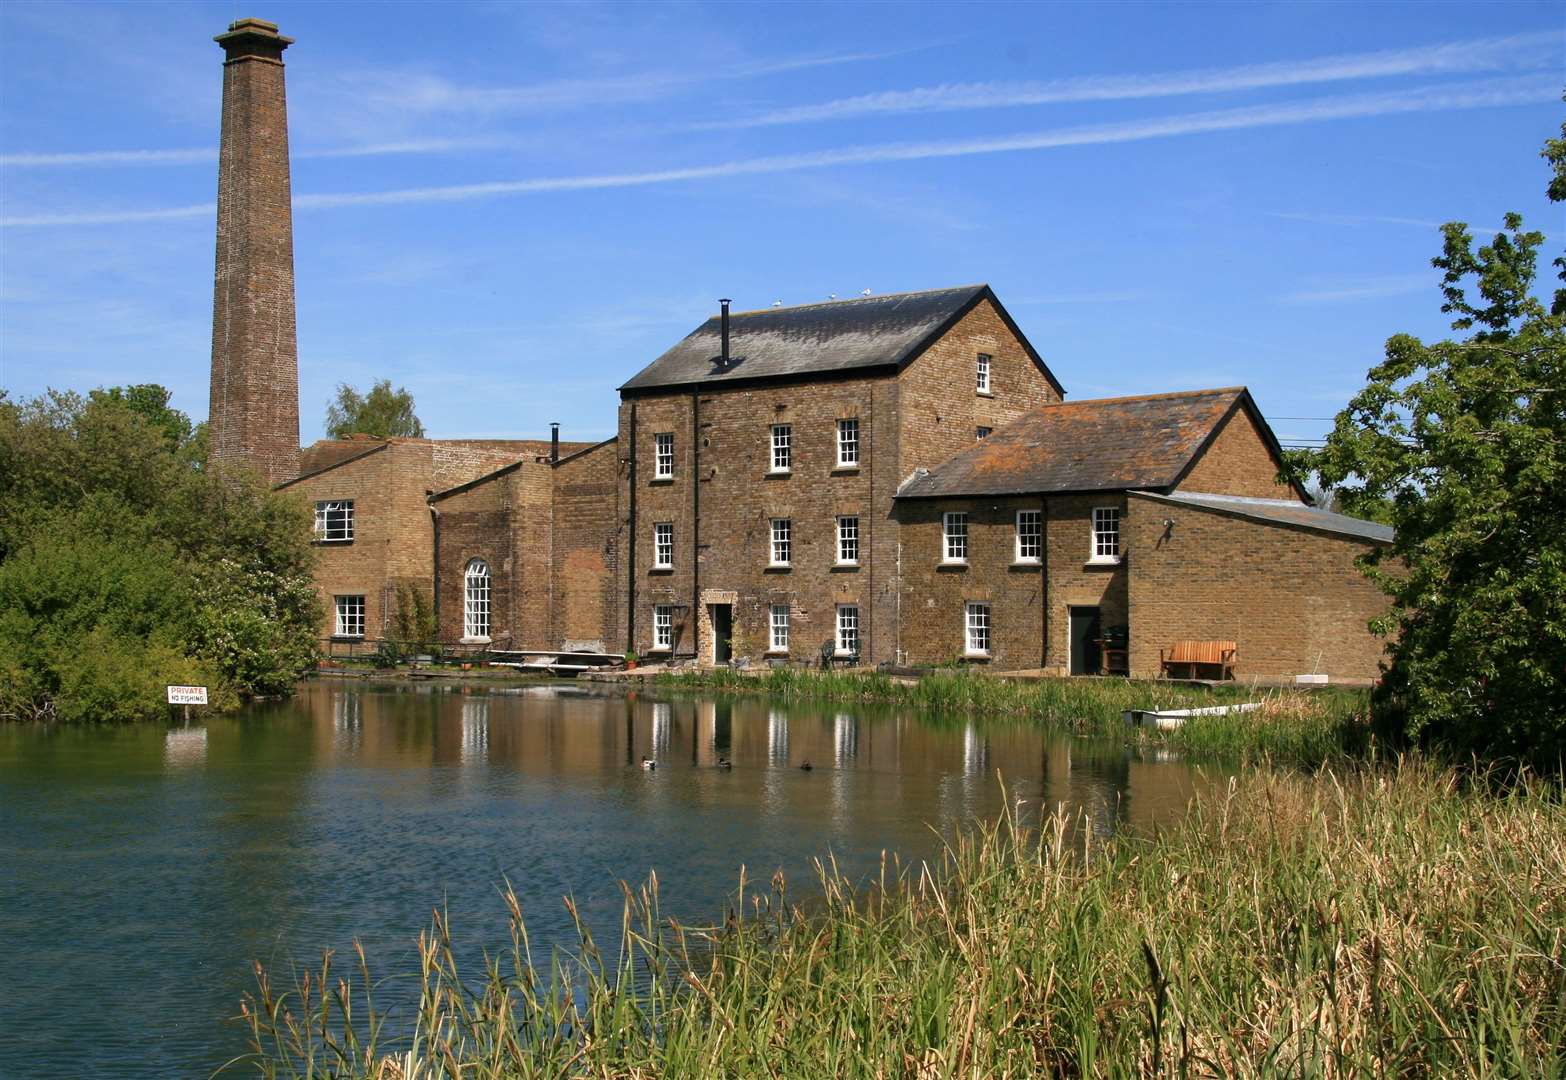 People fear the picturesque tranquility of Tonge, with its beautiful mill, could be lost